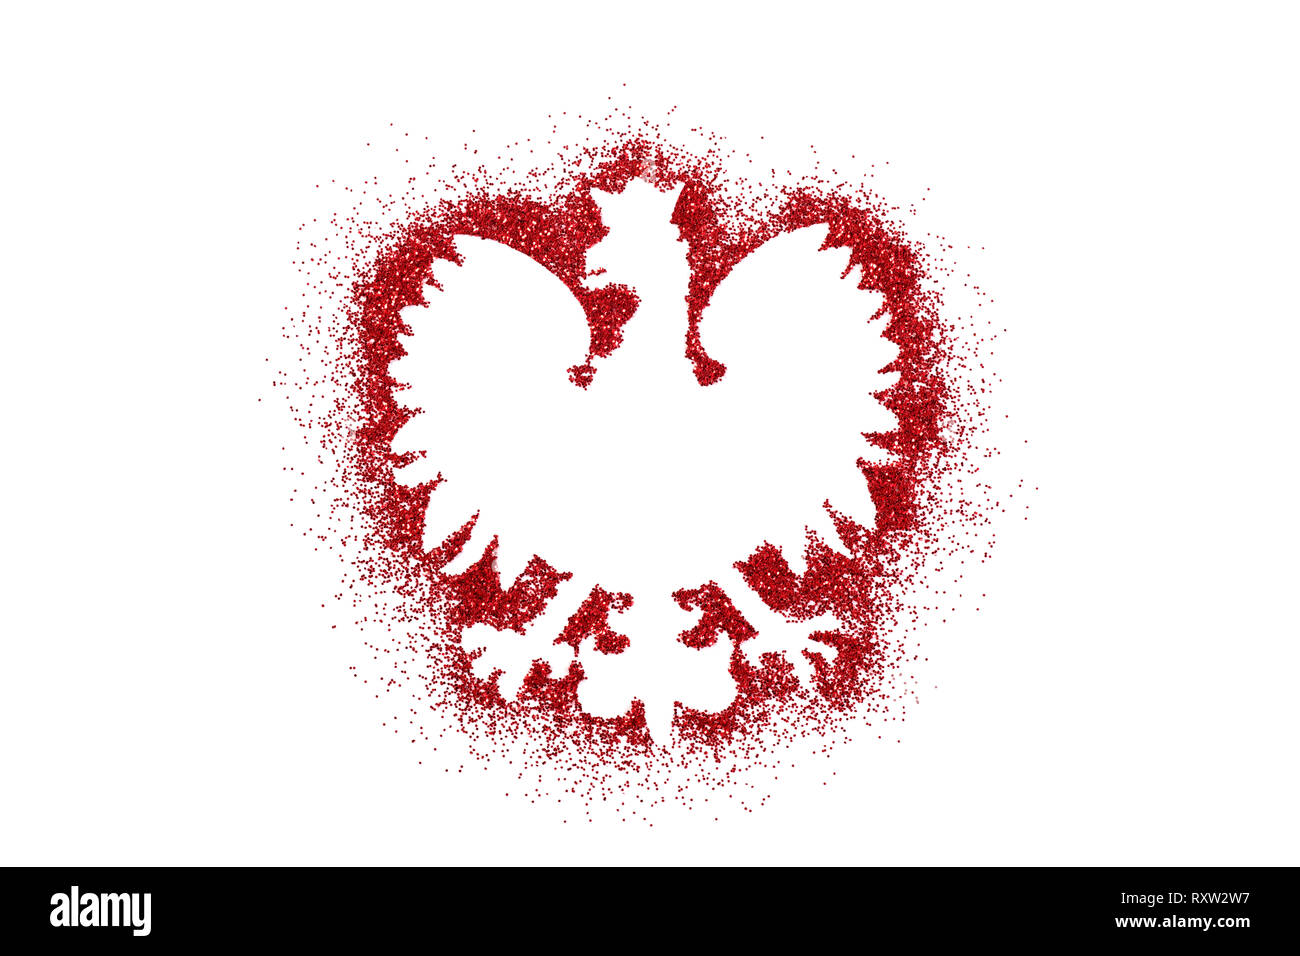 Polish coat of arms shape on red glitter Stock Photo